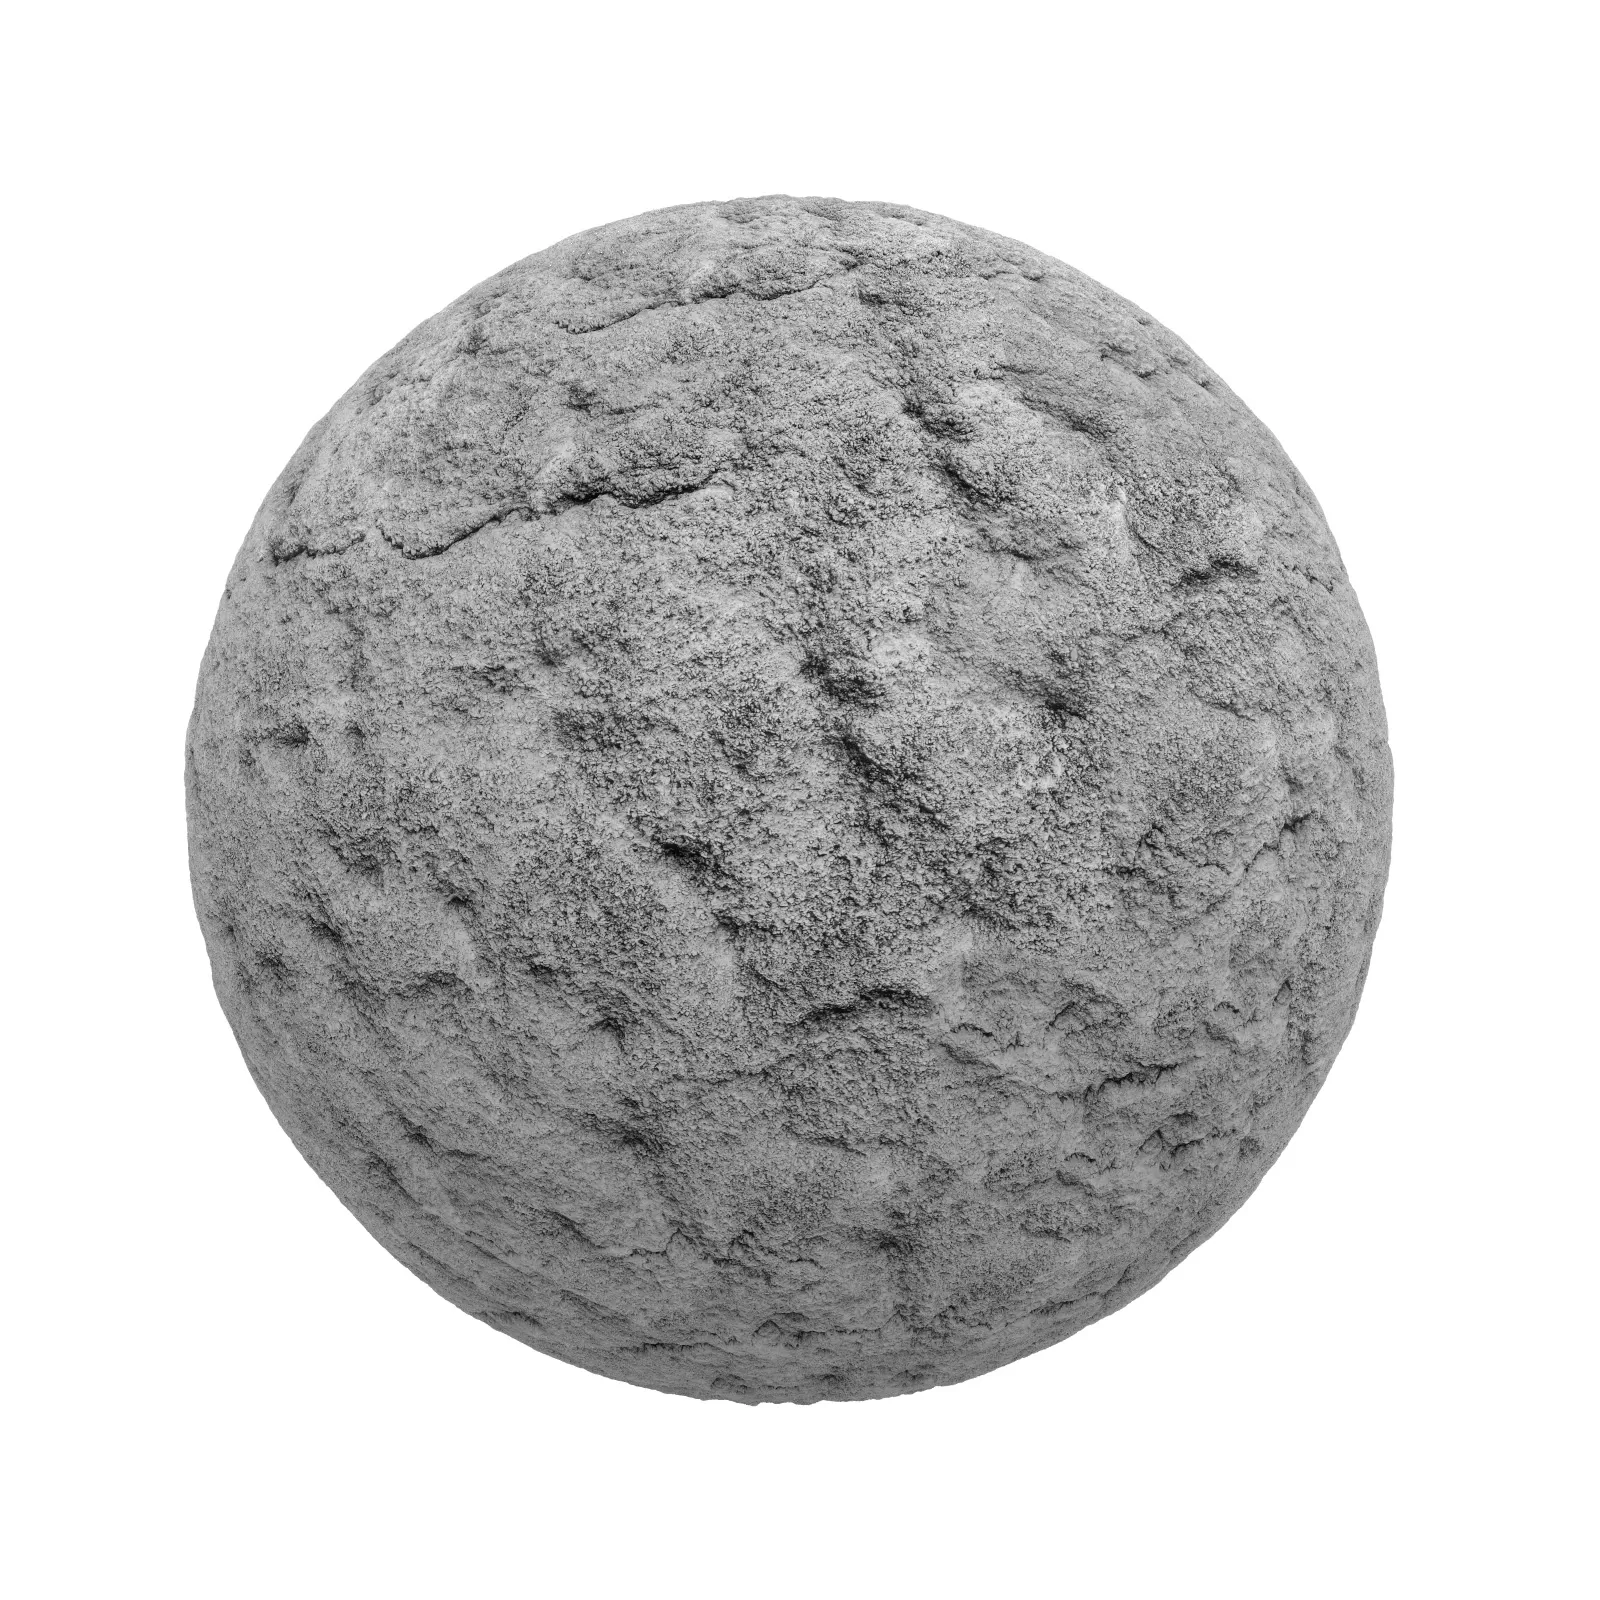 TEXTURES – STONES – CGAxis PBR Colection Vol 1 Stones – rough grey stone 4